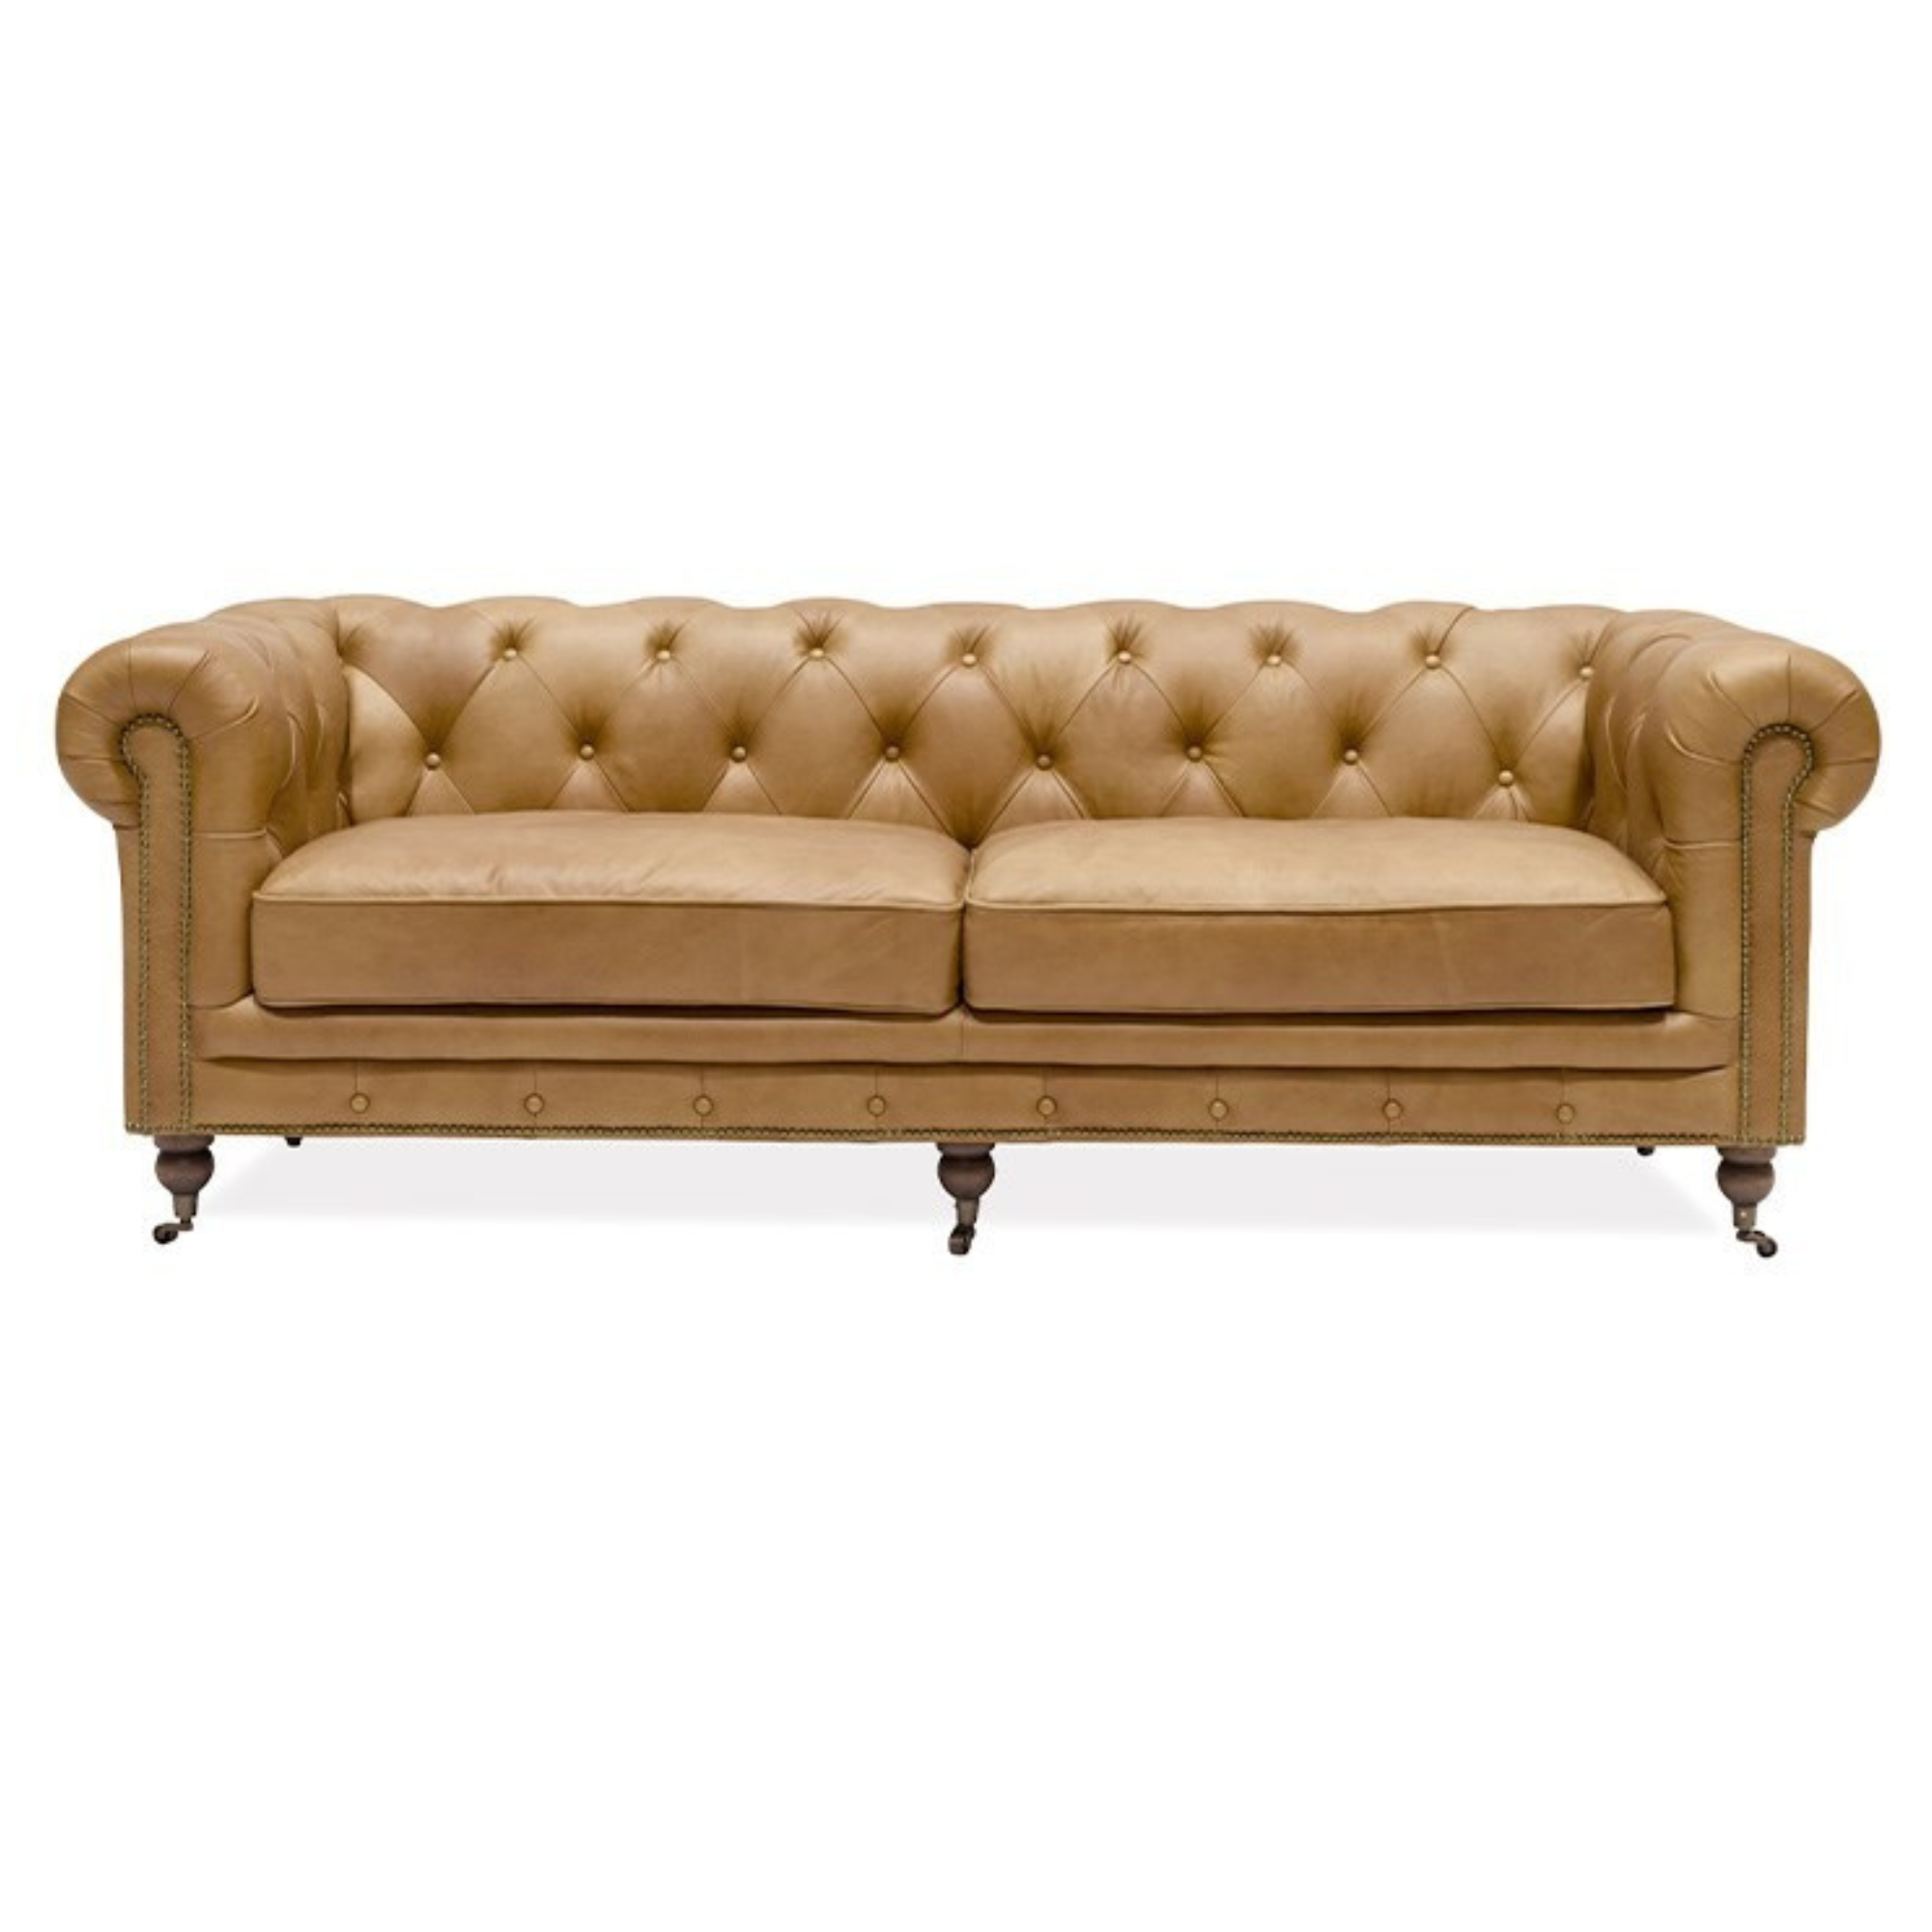 STANHOPE LEATHER 3 SEATER CHESTERFIELD